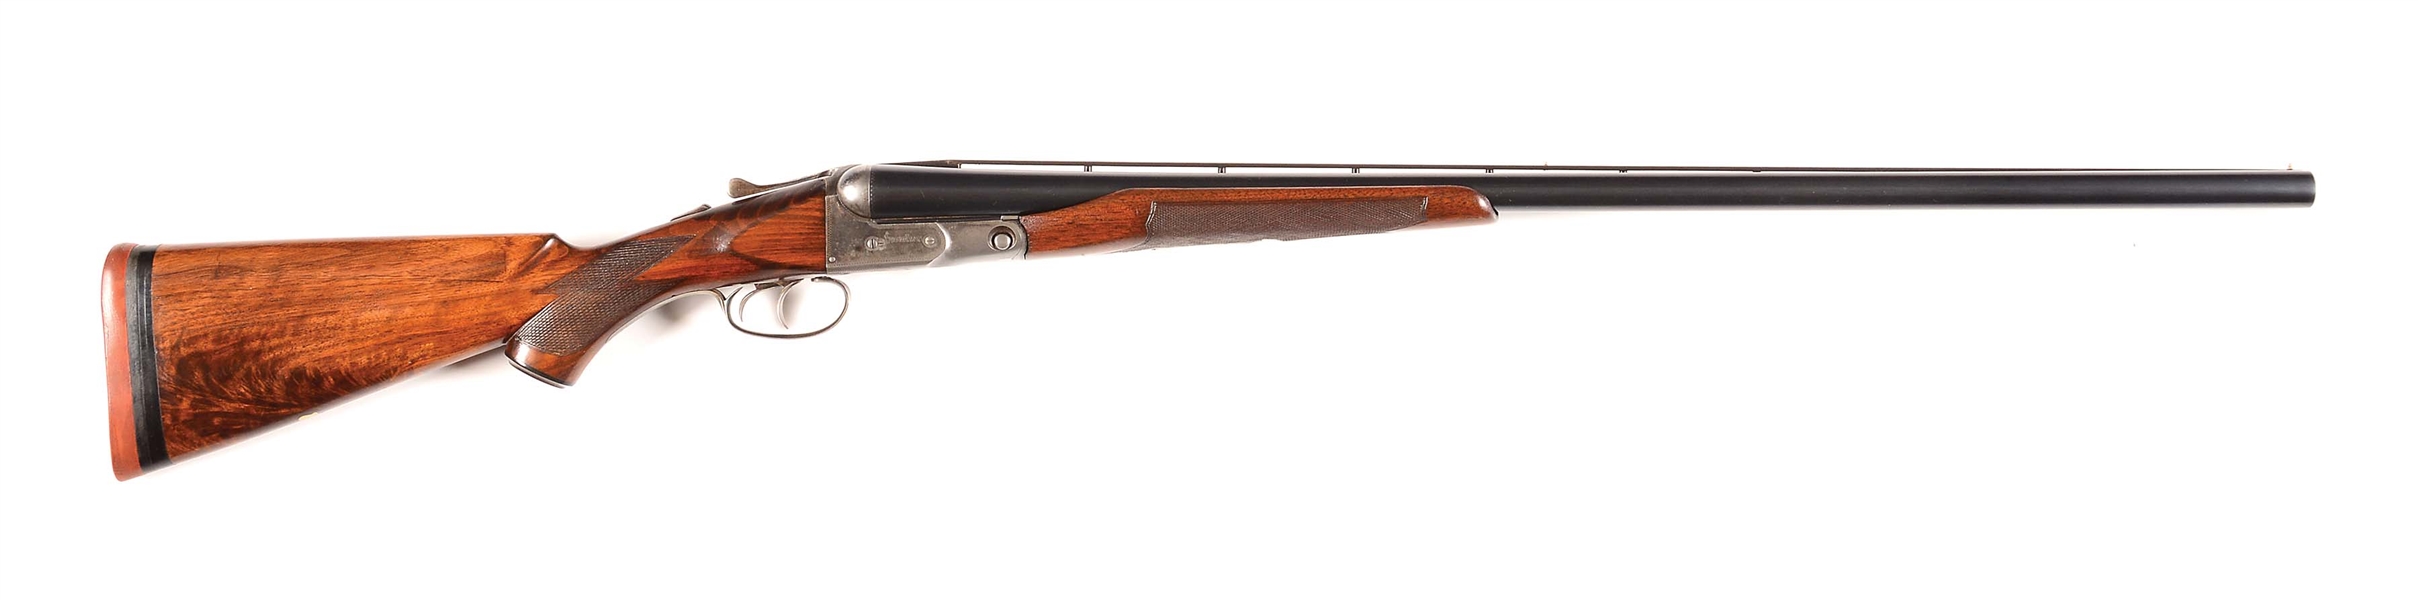 (C) PARKER BROS VHE GRADE SIDE BY SIDE SHOTGUN WITH FACTORY MARKED VENT RIB.